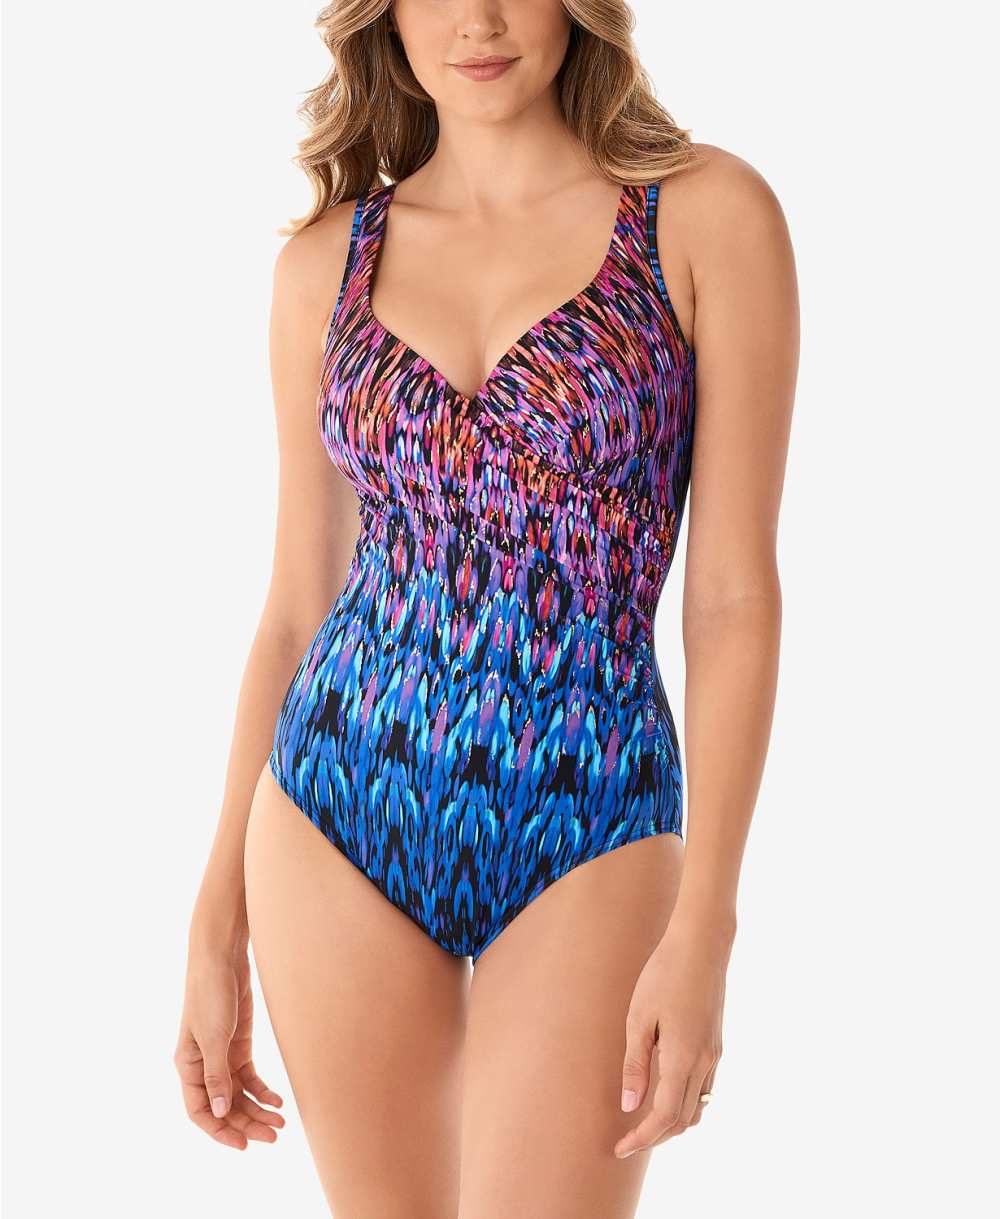 Miraclesuit Vesuvio Its A Wrap One-Piece Tummy Control Swimsuit